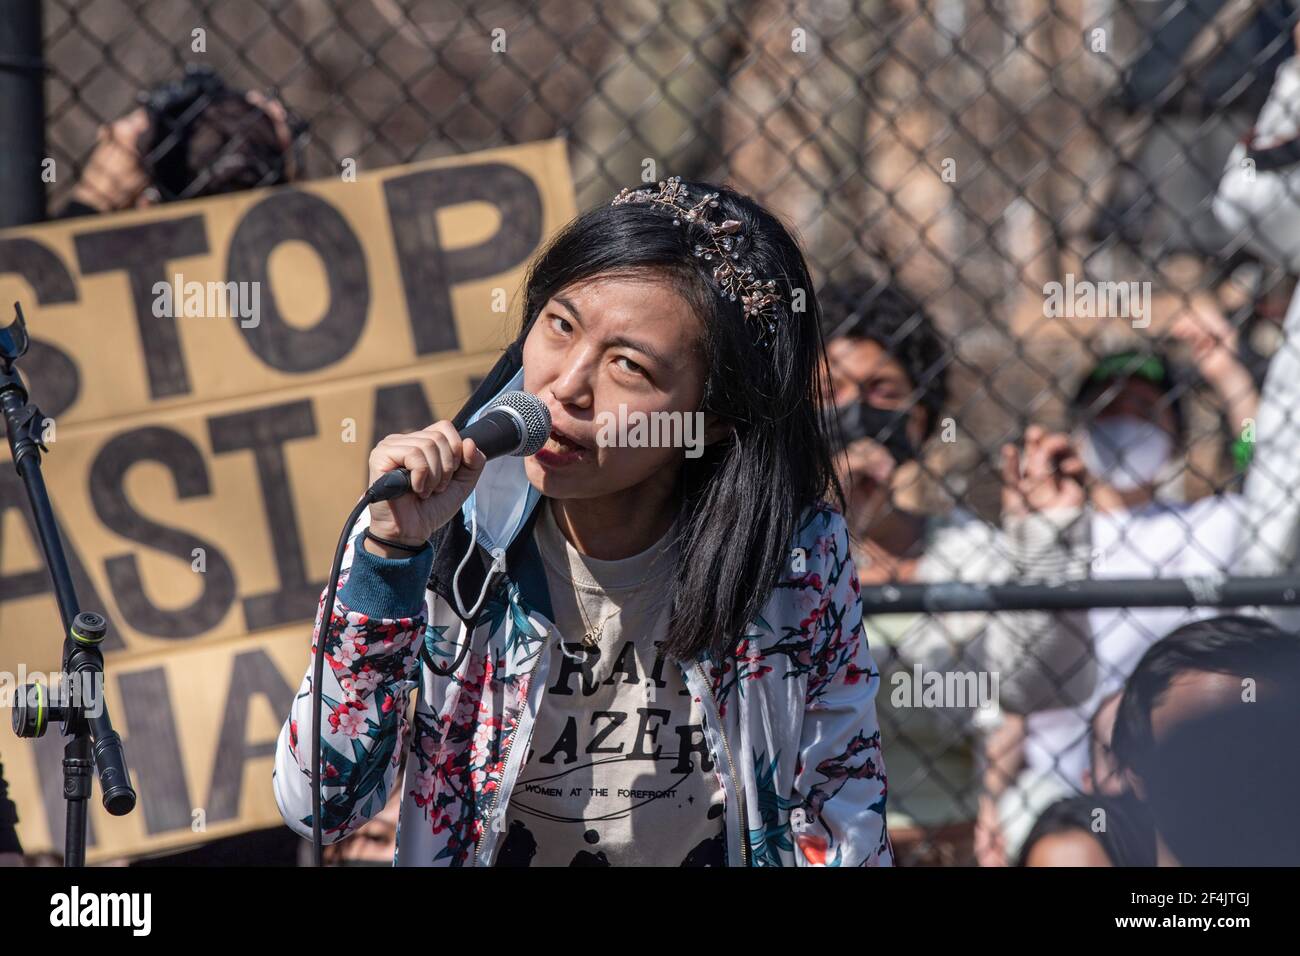 New York, United States. 21st Mar, 2021. Alice Tsui speaks during a rally against hate in Columbus Park in the Chinatown neighbourhood of Manhattan in New York City.A rally for solidarity was organized in response to a rise in hate crimes against the Asian community since the start of the coronavirus (COVID-19) pandemic in 2020. On March 16 in Atlanta, Georgia, a man went on a shooting spree in three spas that left eight people dead, including six Asian women. (Photo by Ron Adar/SOPA Images/Sipa USA) Credit: Sipa USA/Alamy Live News Stock Photo